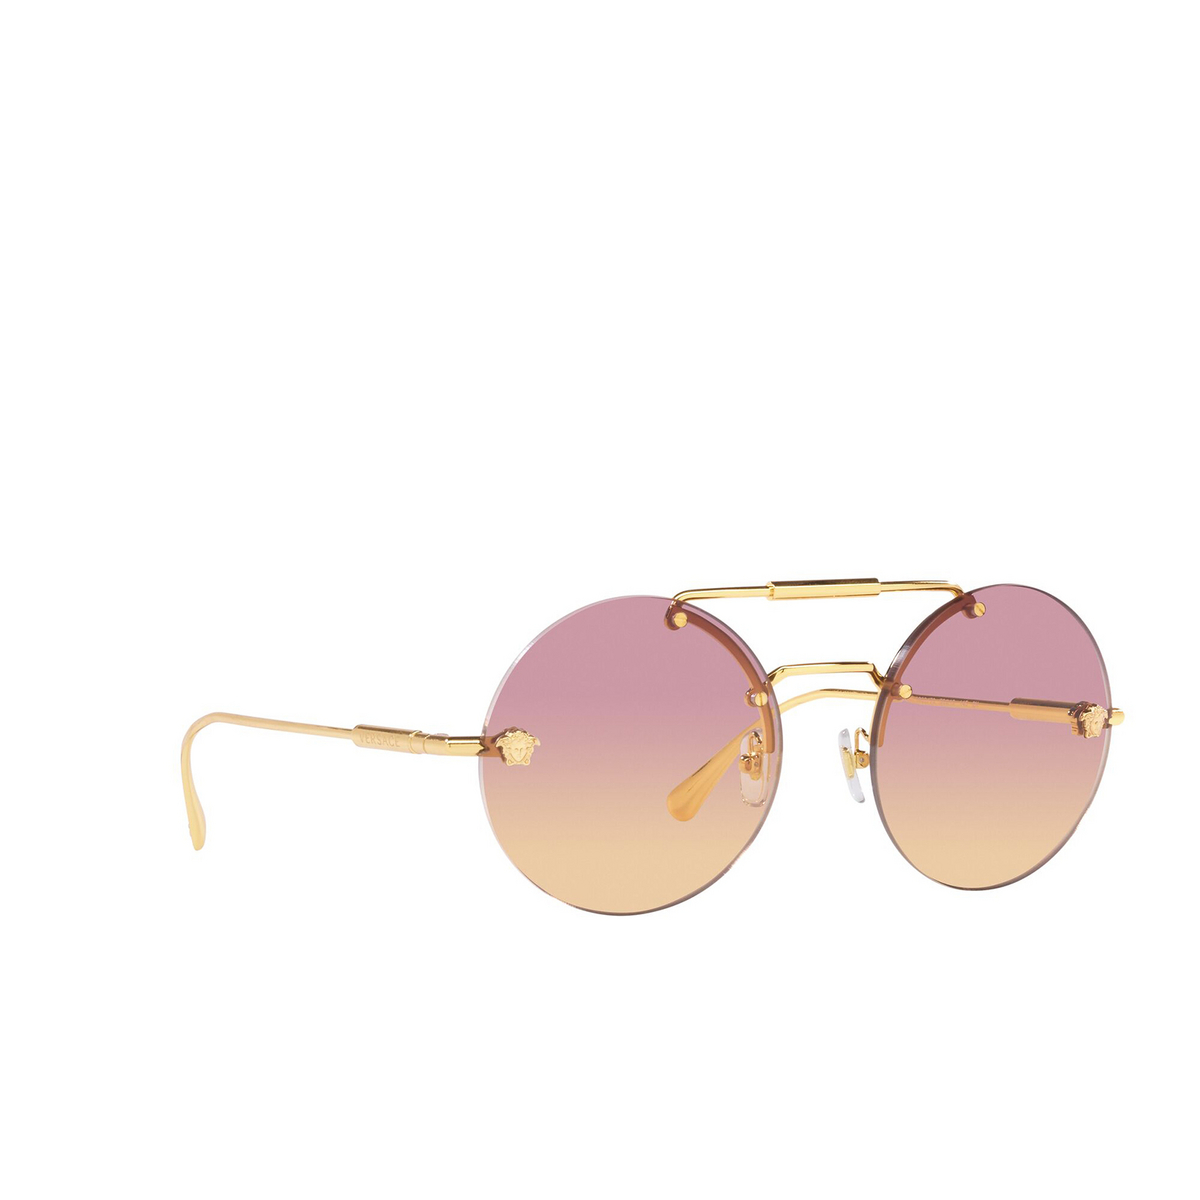 Versace® Round Sunglasses: VE2244 color Gold 100278 - three-quarters view.